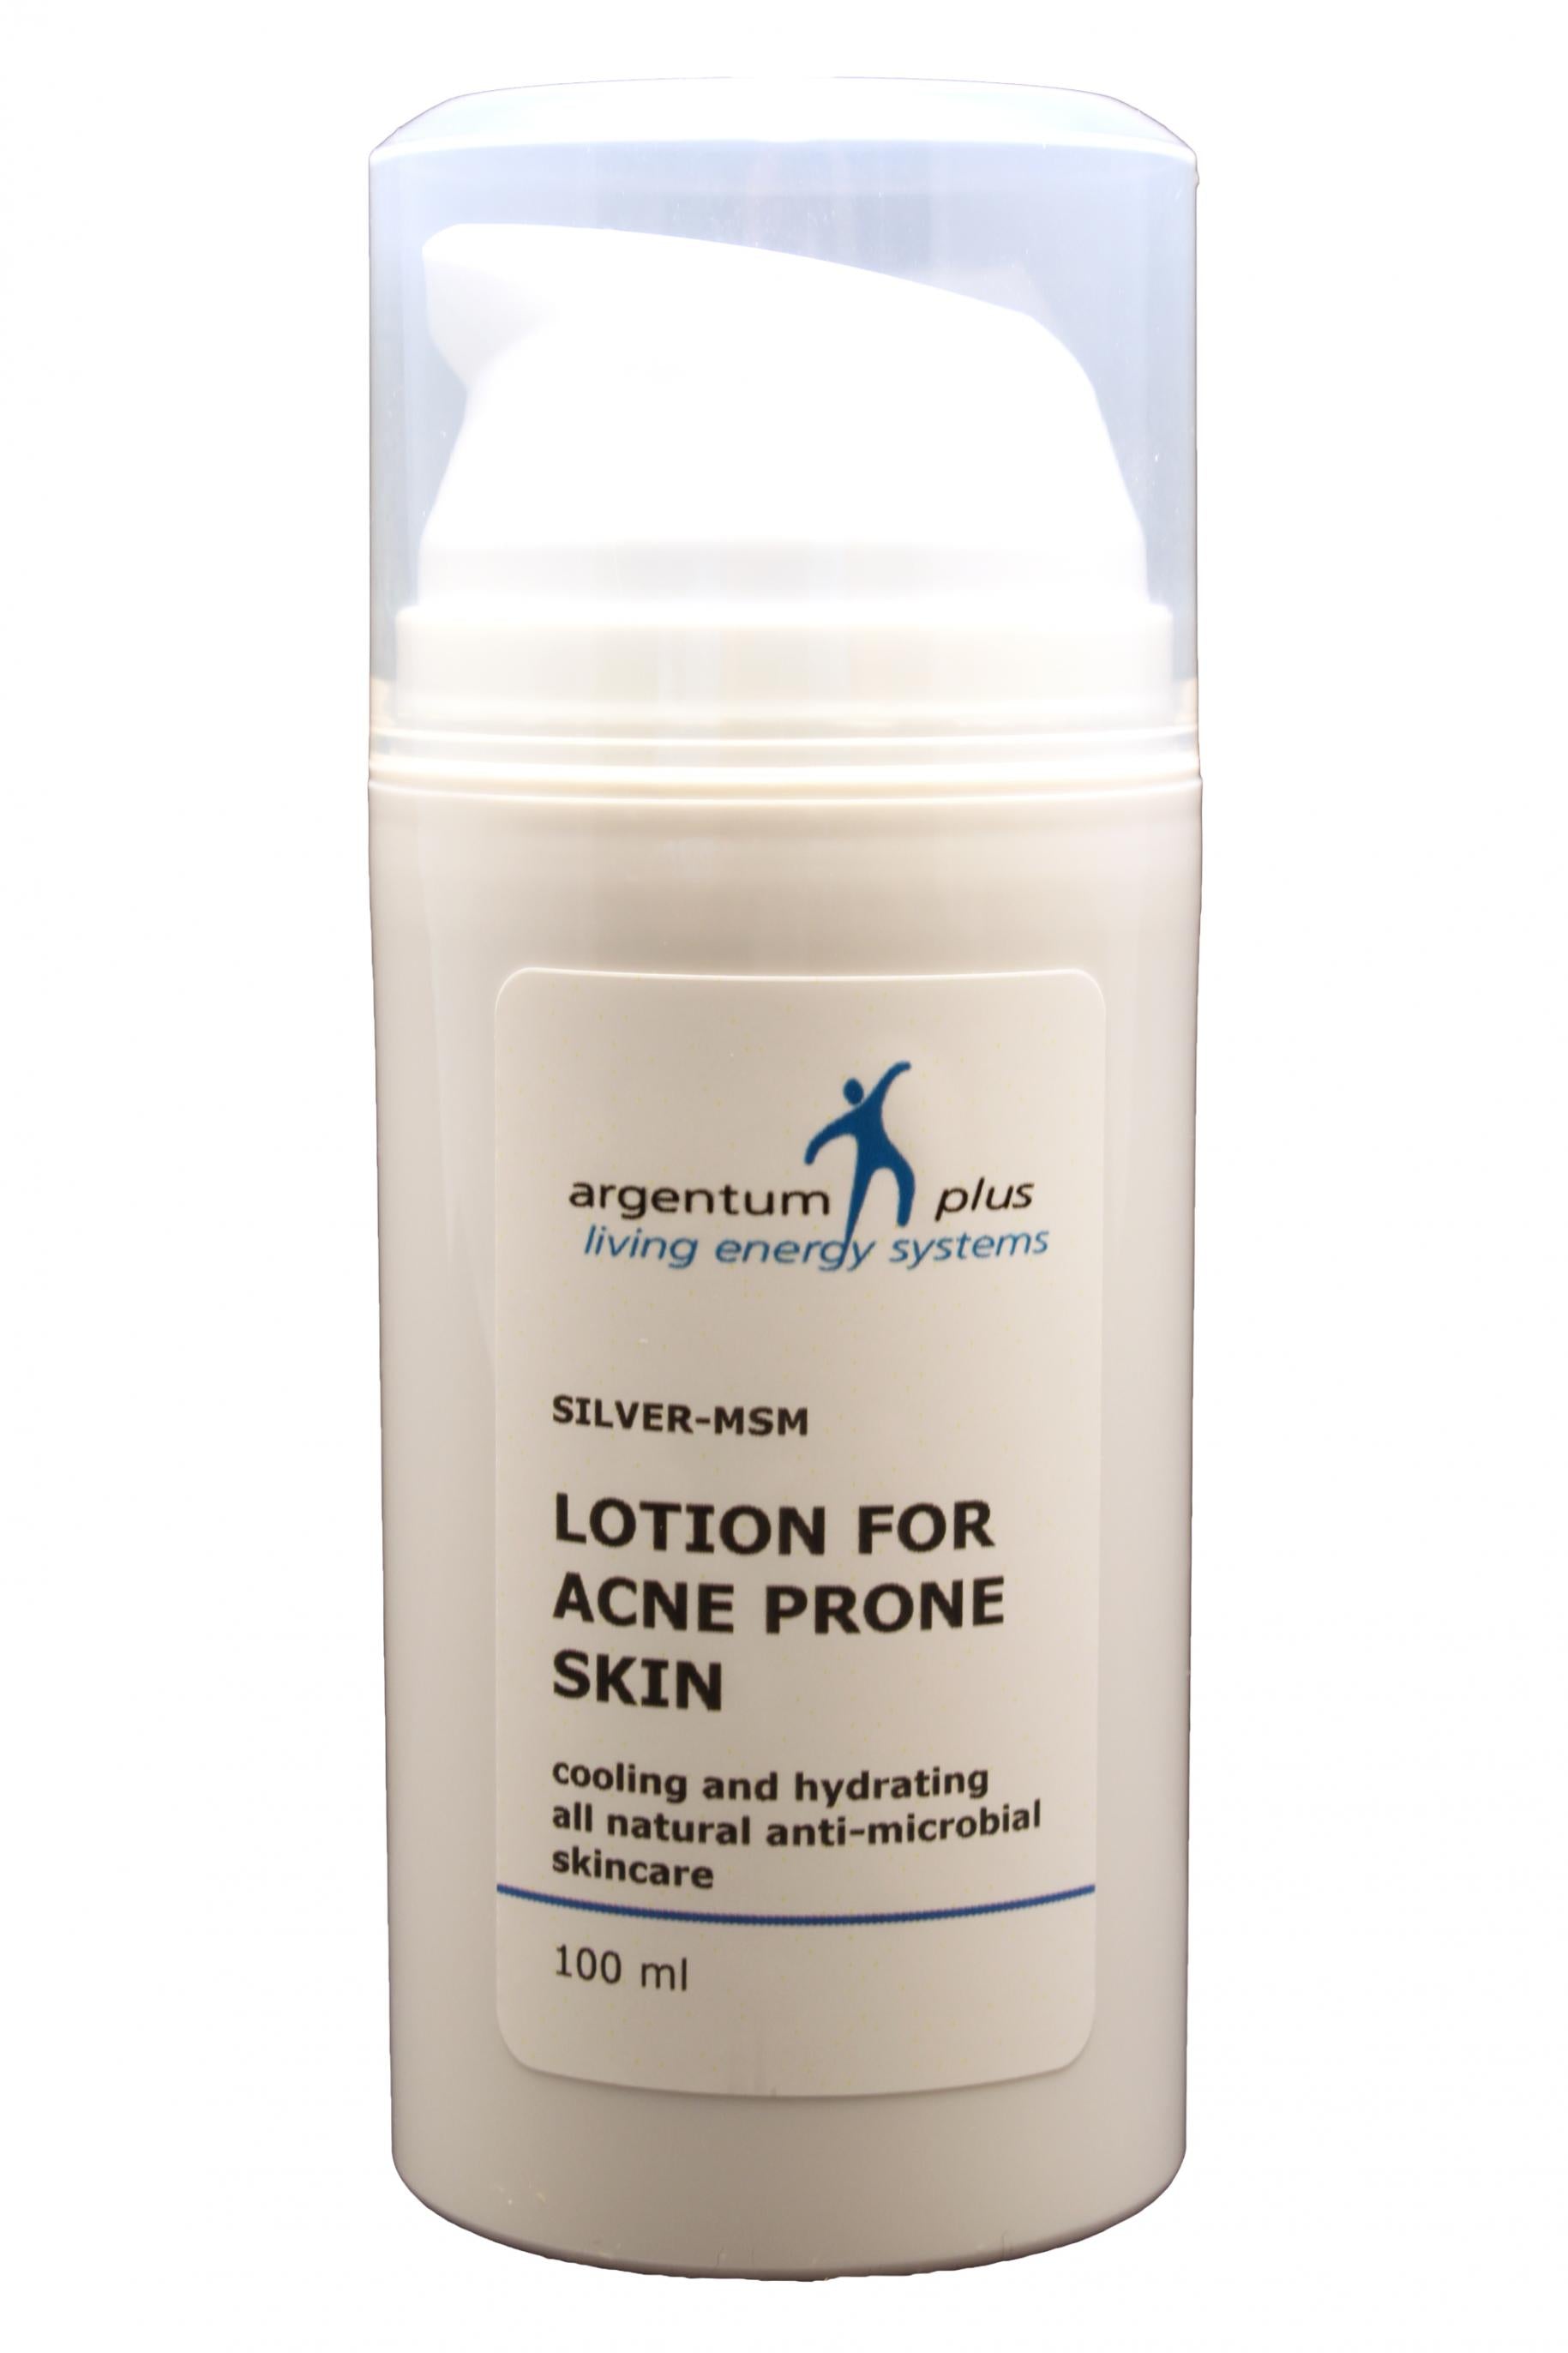 Argentum Plus Silver-MSM Lotion for Acne Prone Skin 100ml